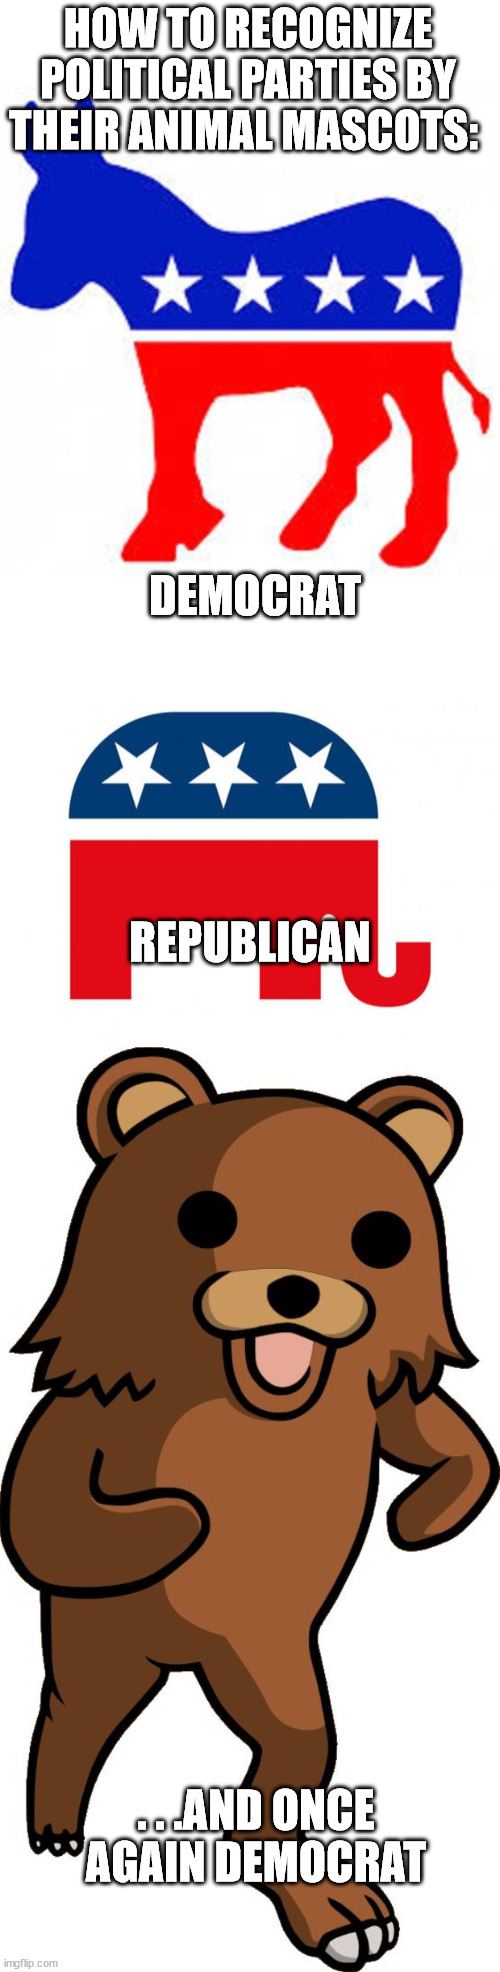 Who knew Democrats has two Animal Mascots. | HOW TO RECOGNIZE POLITICAL PARTIES BY THEIR ANIMAL MASCOTS:; DEMOCRAT; REPUBLICAN; . . .AND ONCE AGAIN DEMOCRAT | image tagged in democrat donkey,republican,pedobear,political humor,political meme,memes | made w/ Imgflip meme maker